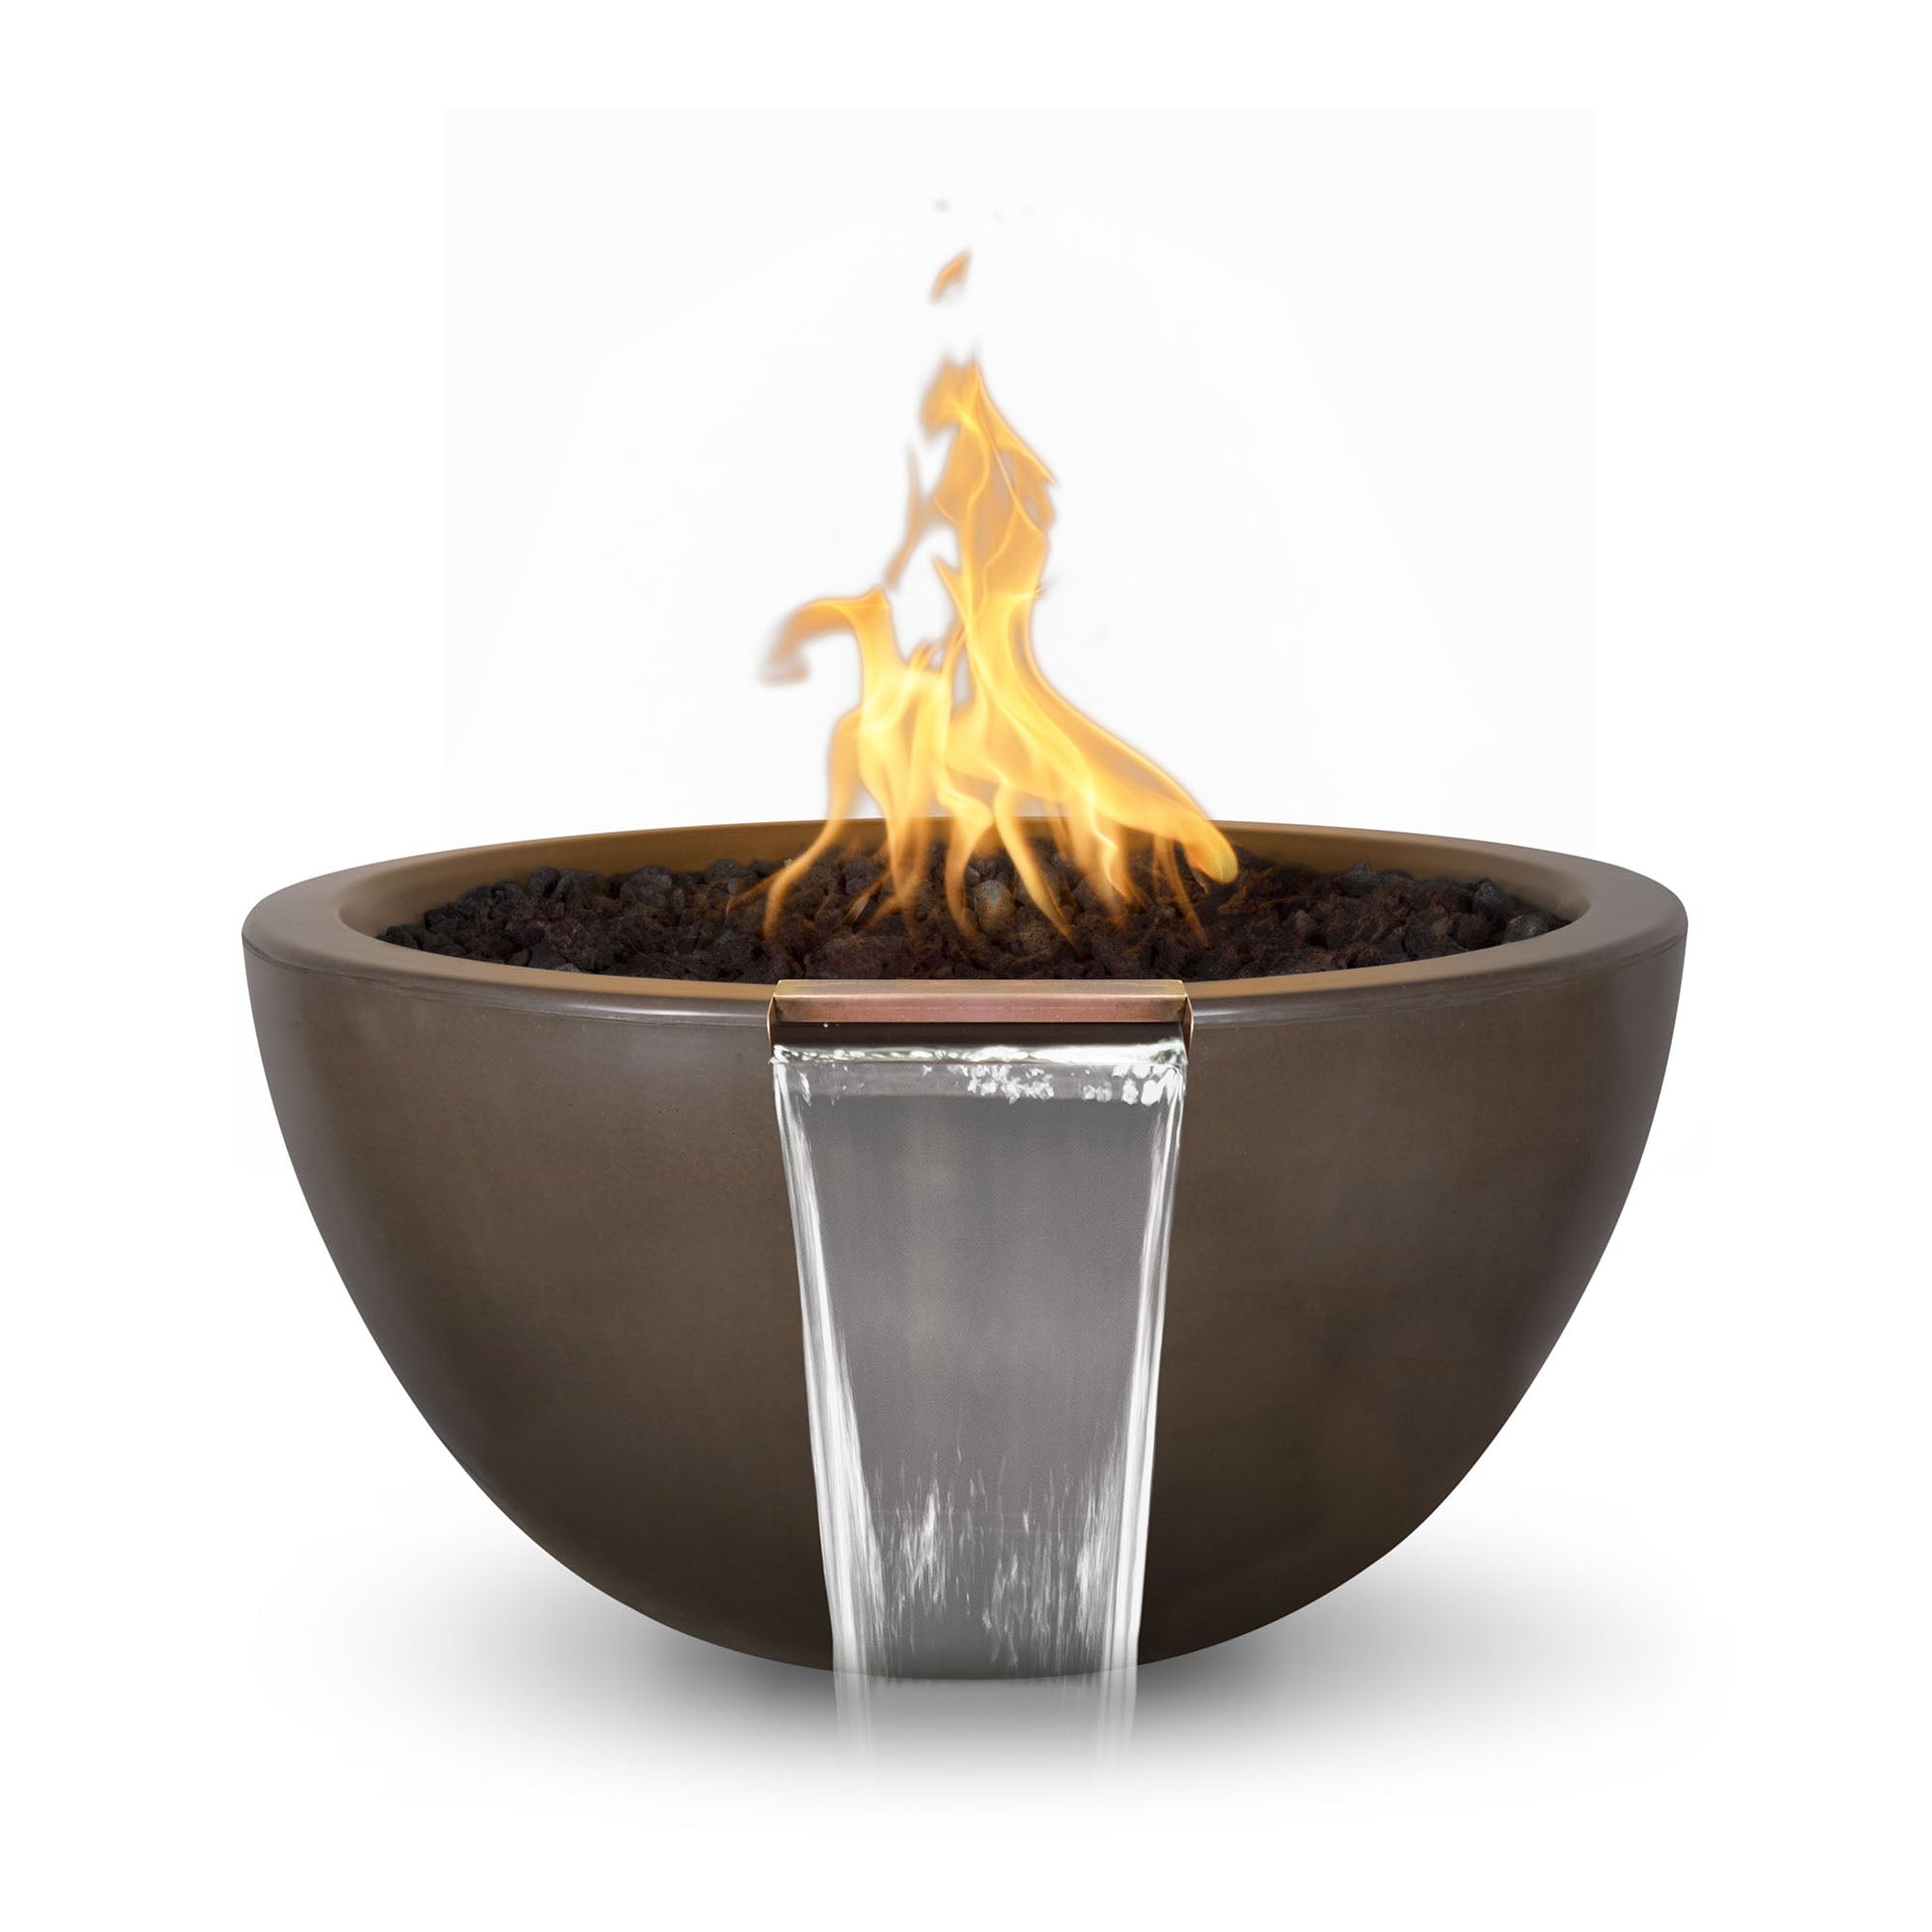 The Outdoor Plus Round Luna 38" Ash GFRC Concrete Natural Gas Fire & Water Bowl with Match Lit with Flame Sense Ignition